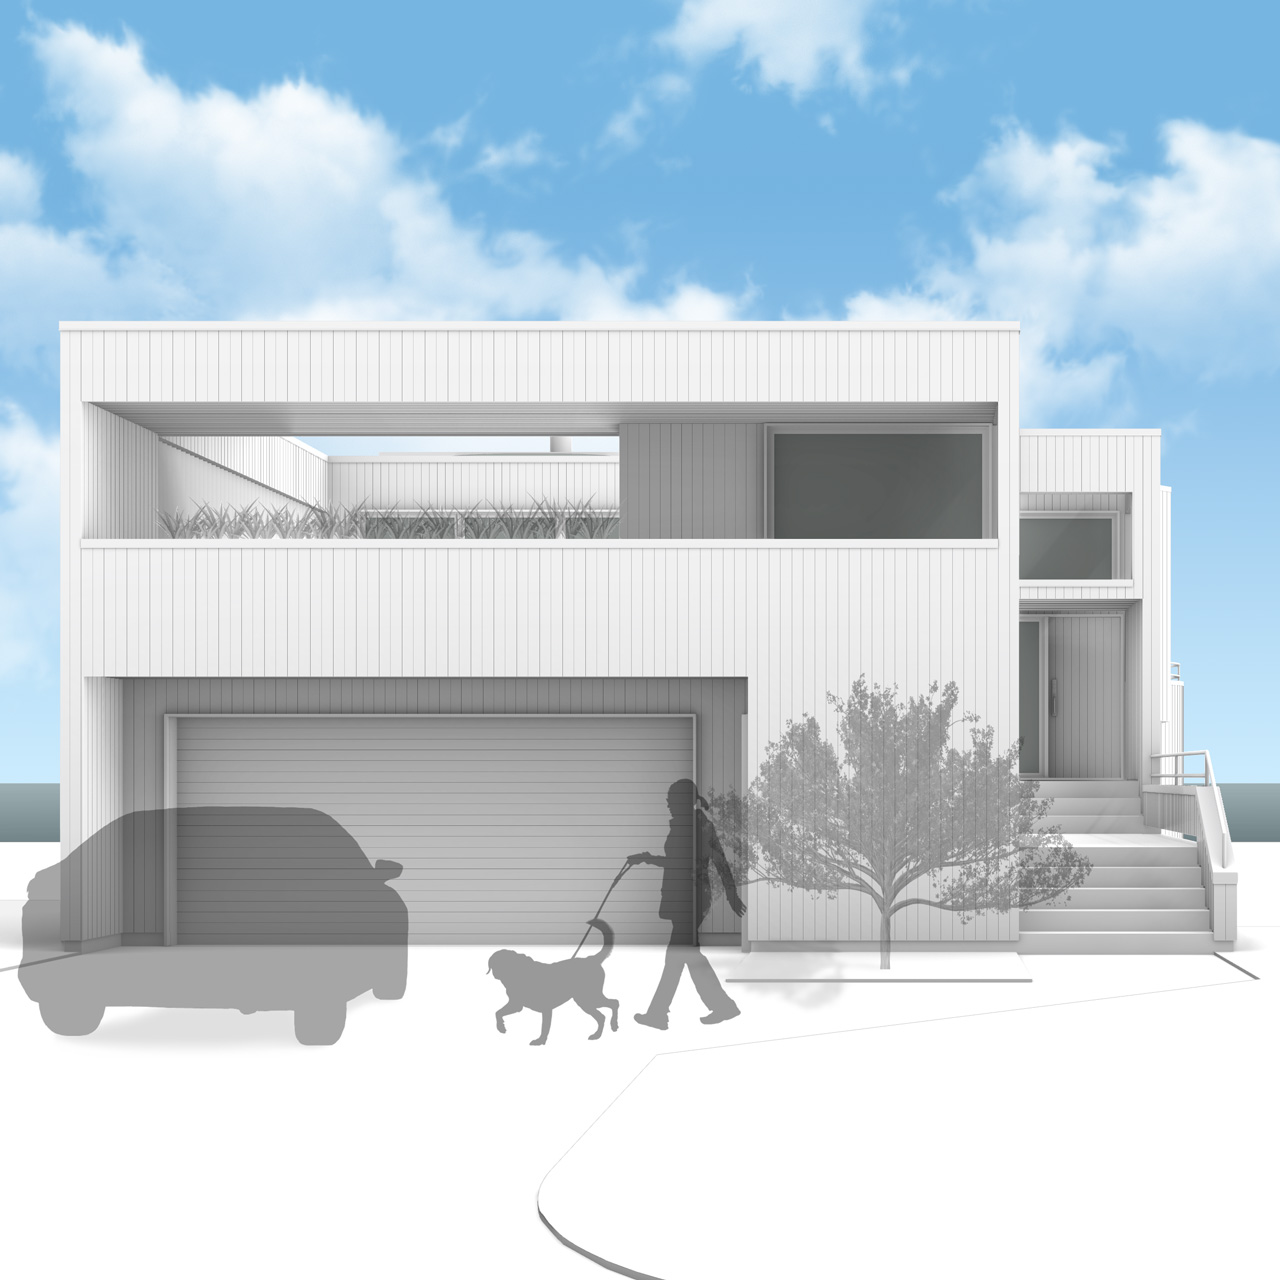 Architectural rendering of the front elevation of the modern exterior restoration.